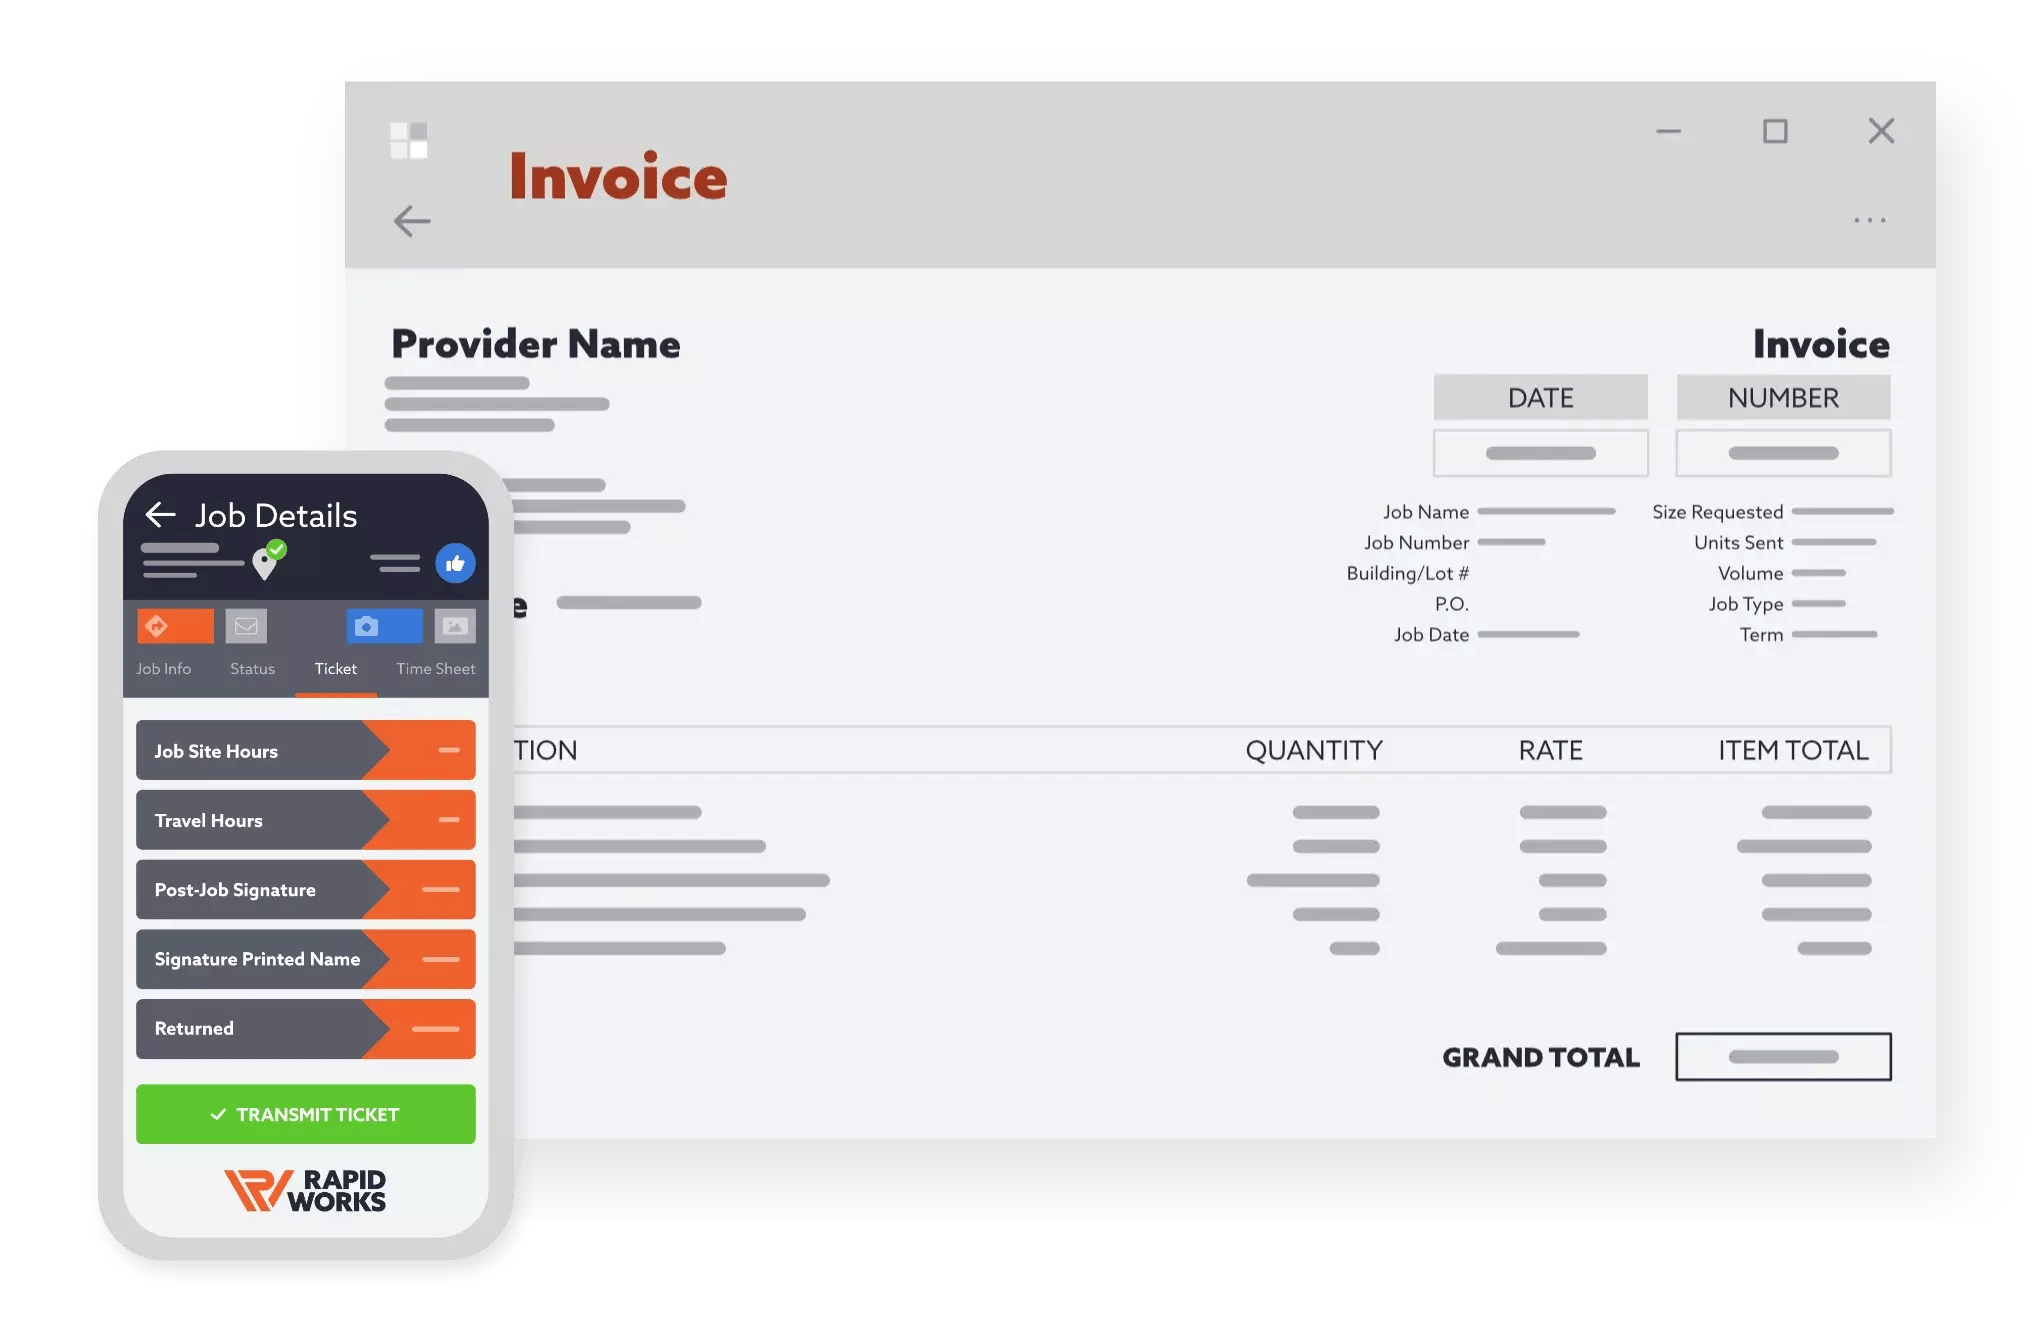 Sample invoice and electronic job ticket.